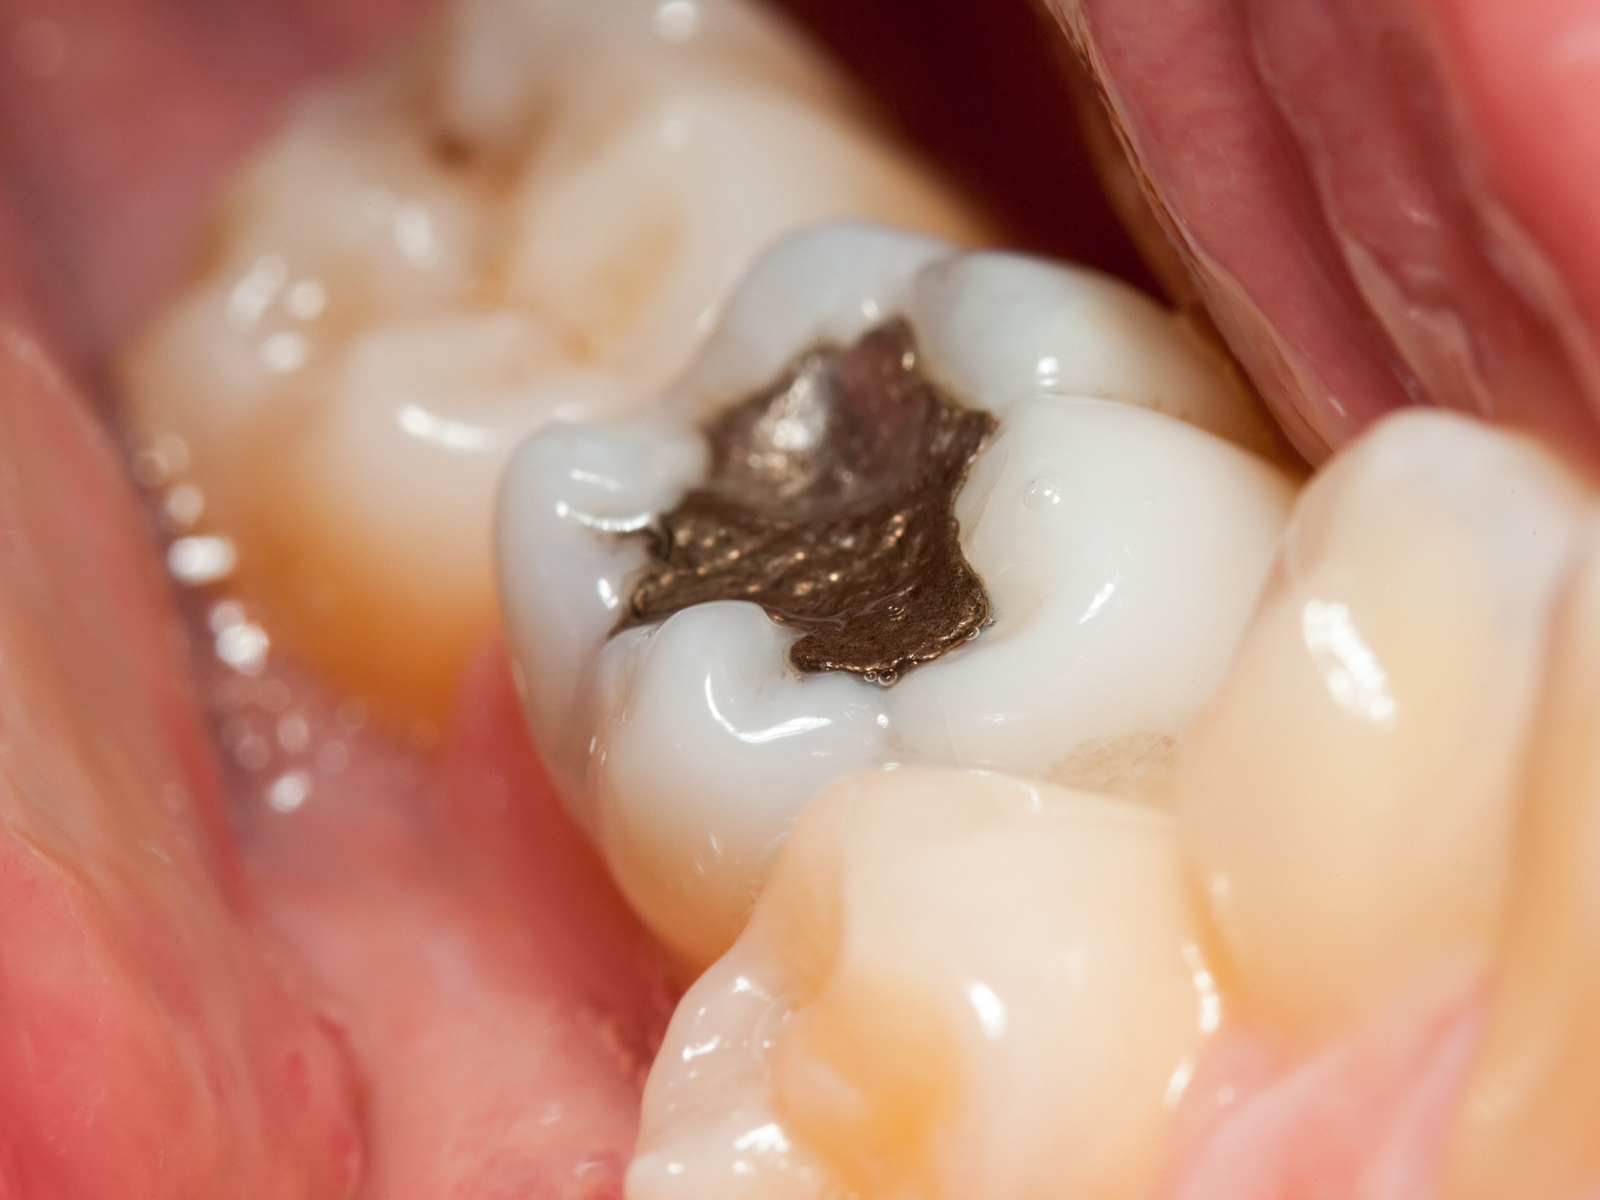 Can Dental Cavities Predict Future Health Problems?